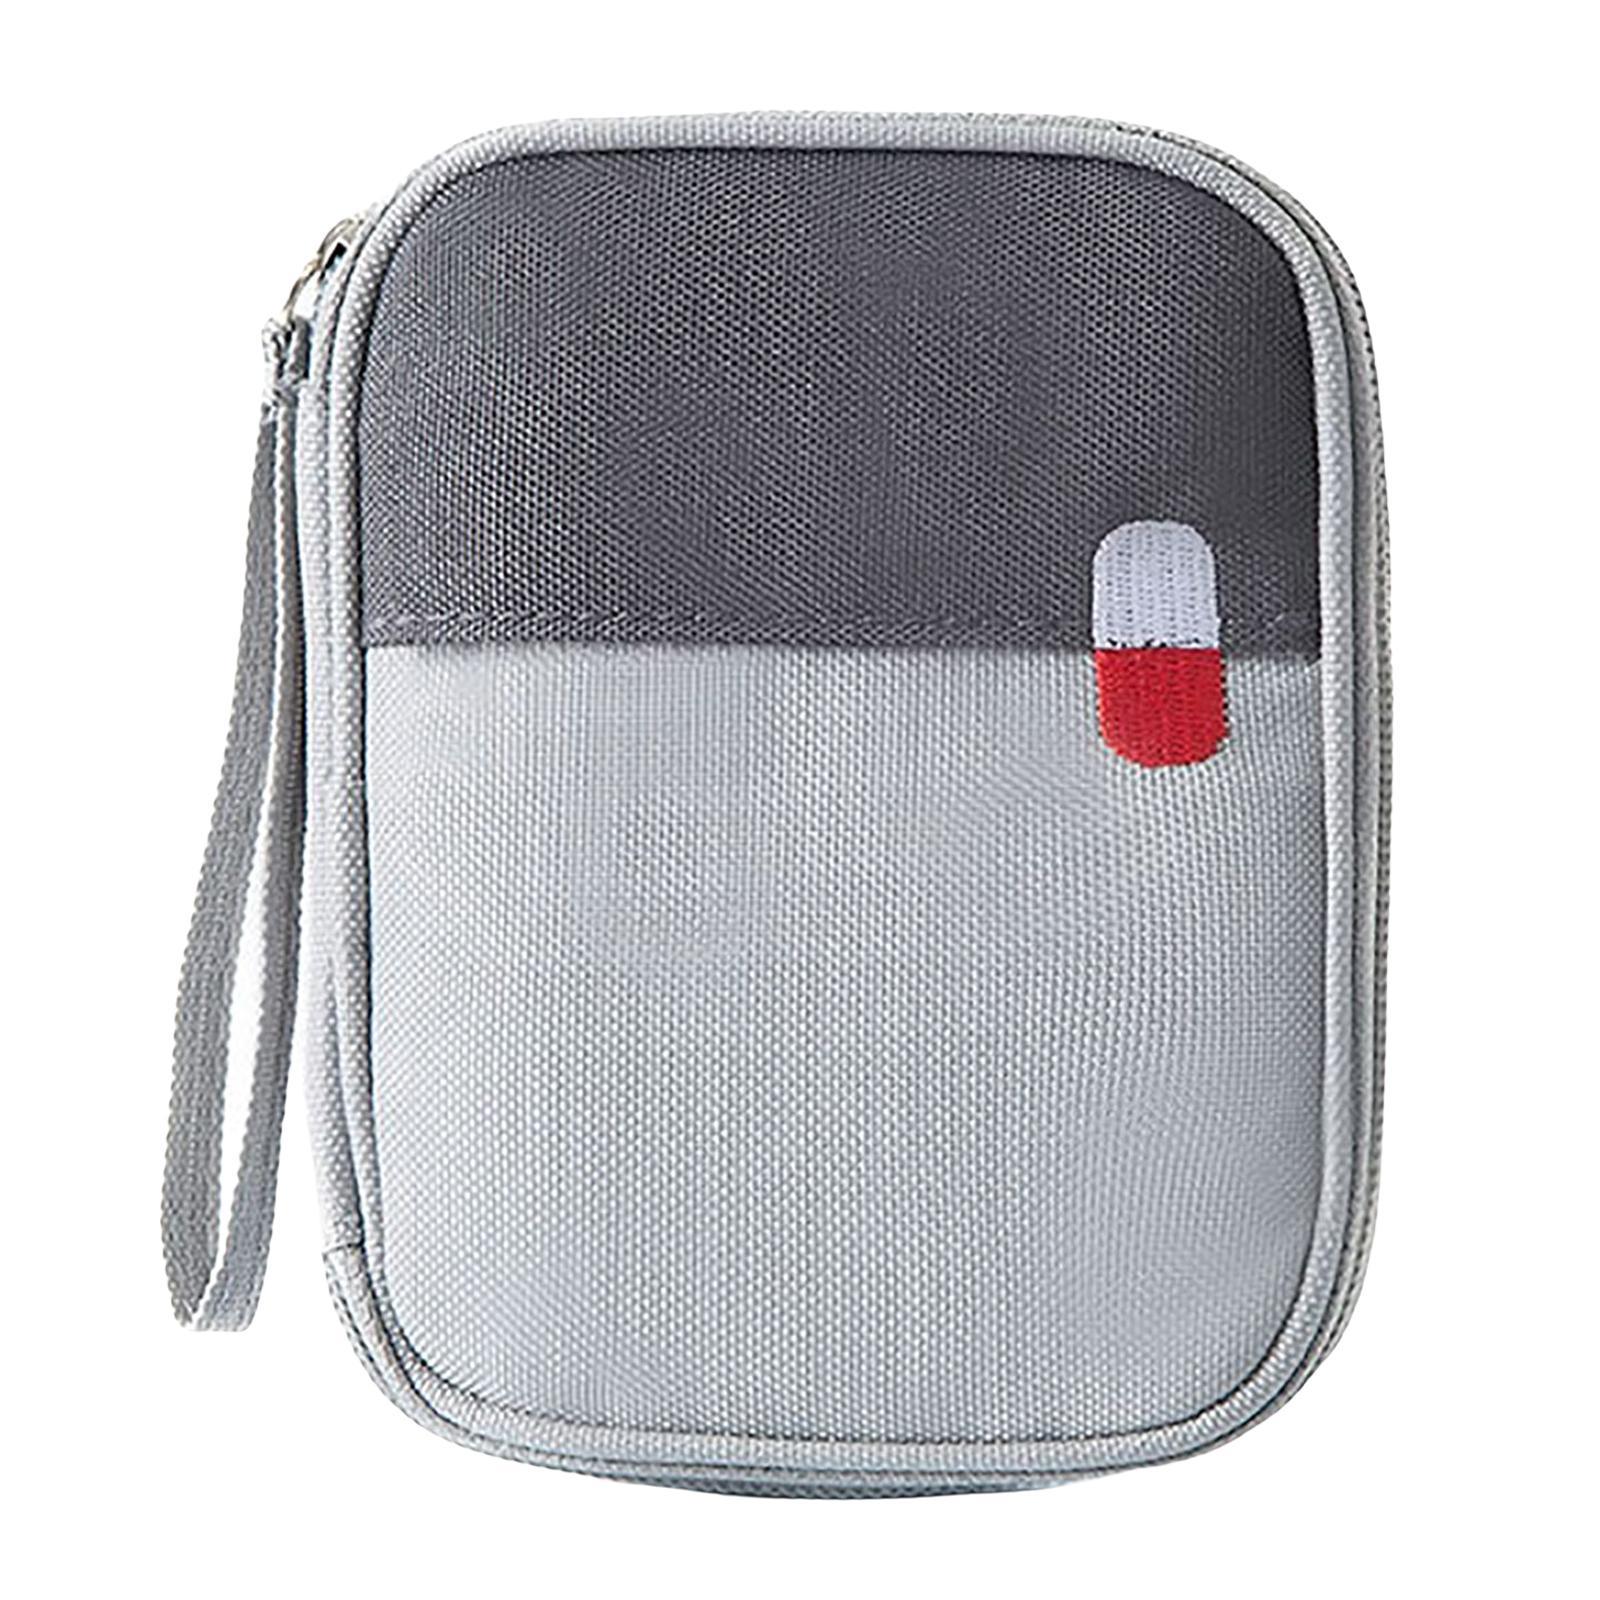 First Aid Bag Storage Pouch Emergency Survival Bag Medicine Storage Bag for Home Sports